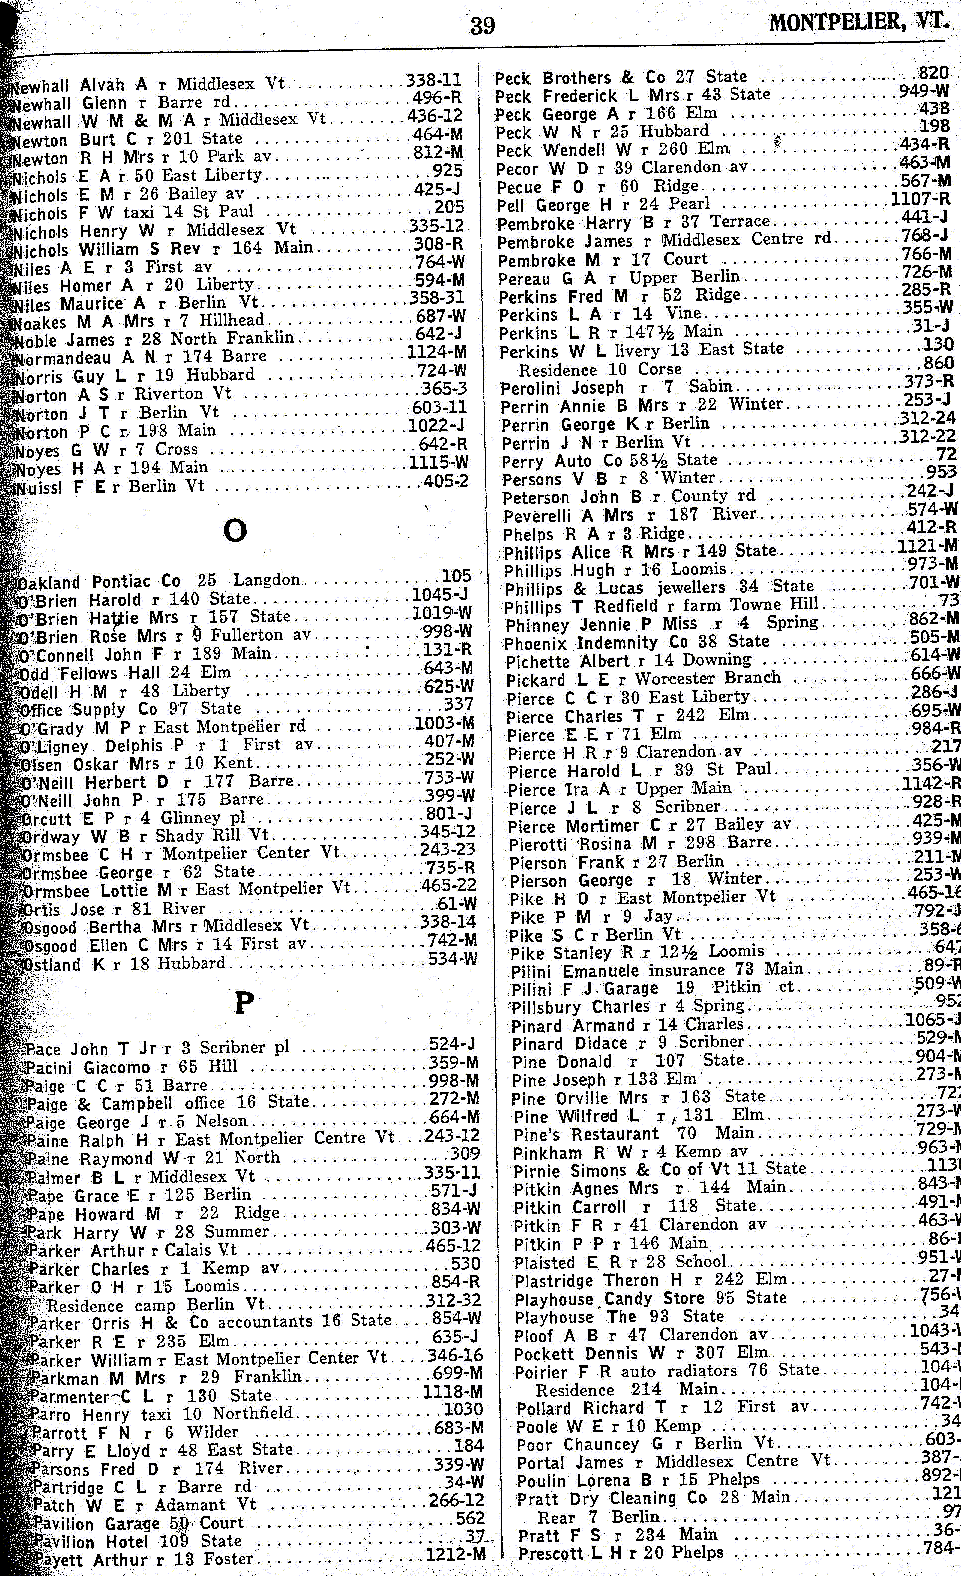 1928 Montpelier Vt Telephone Book - Page 39